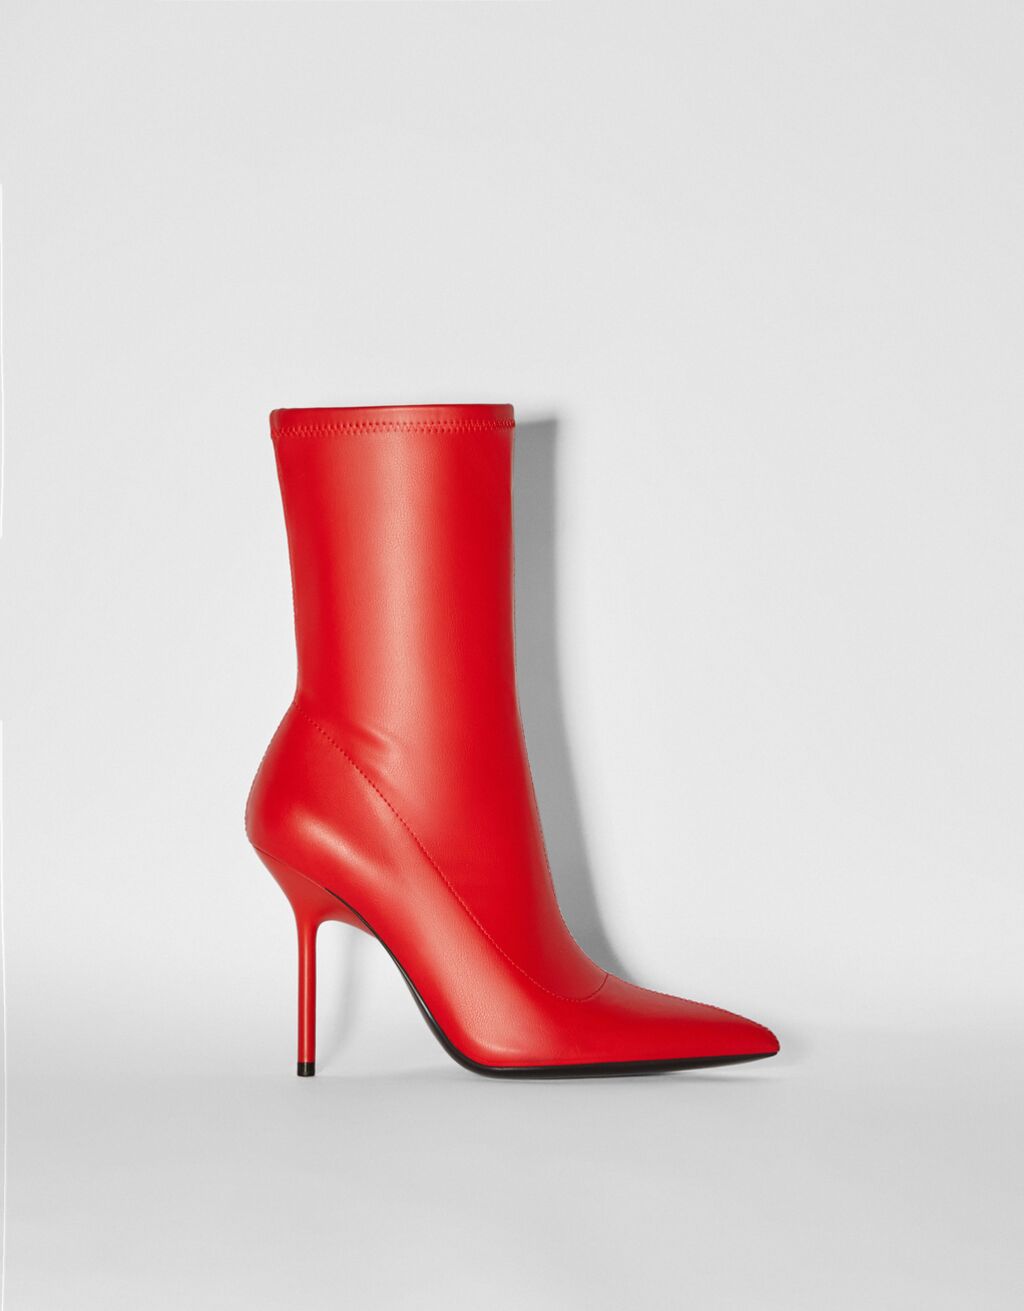 Tailored high-heel ankle boots